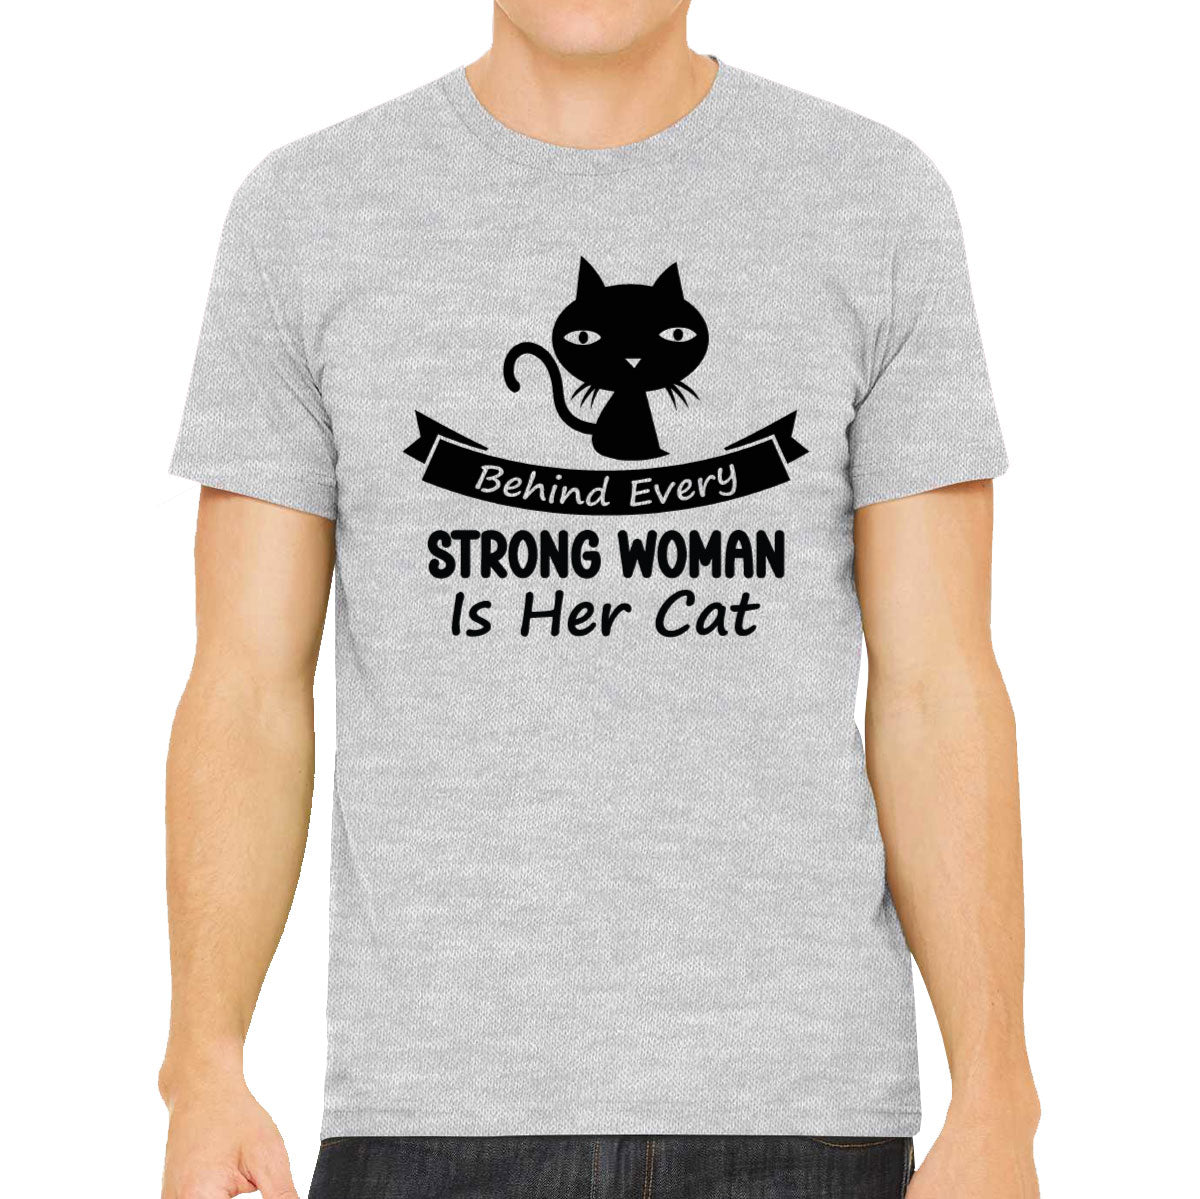 Behind Every Strong Woman Is Her Cat Men's T-shirt